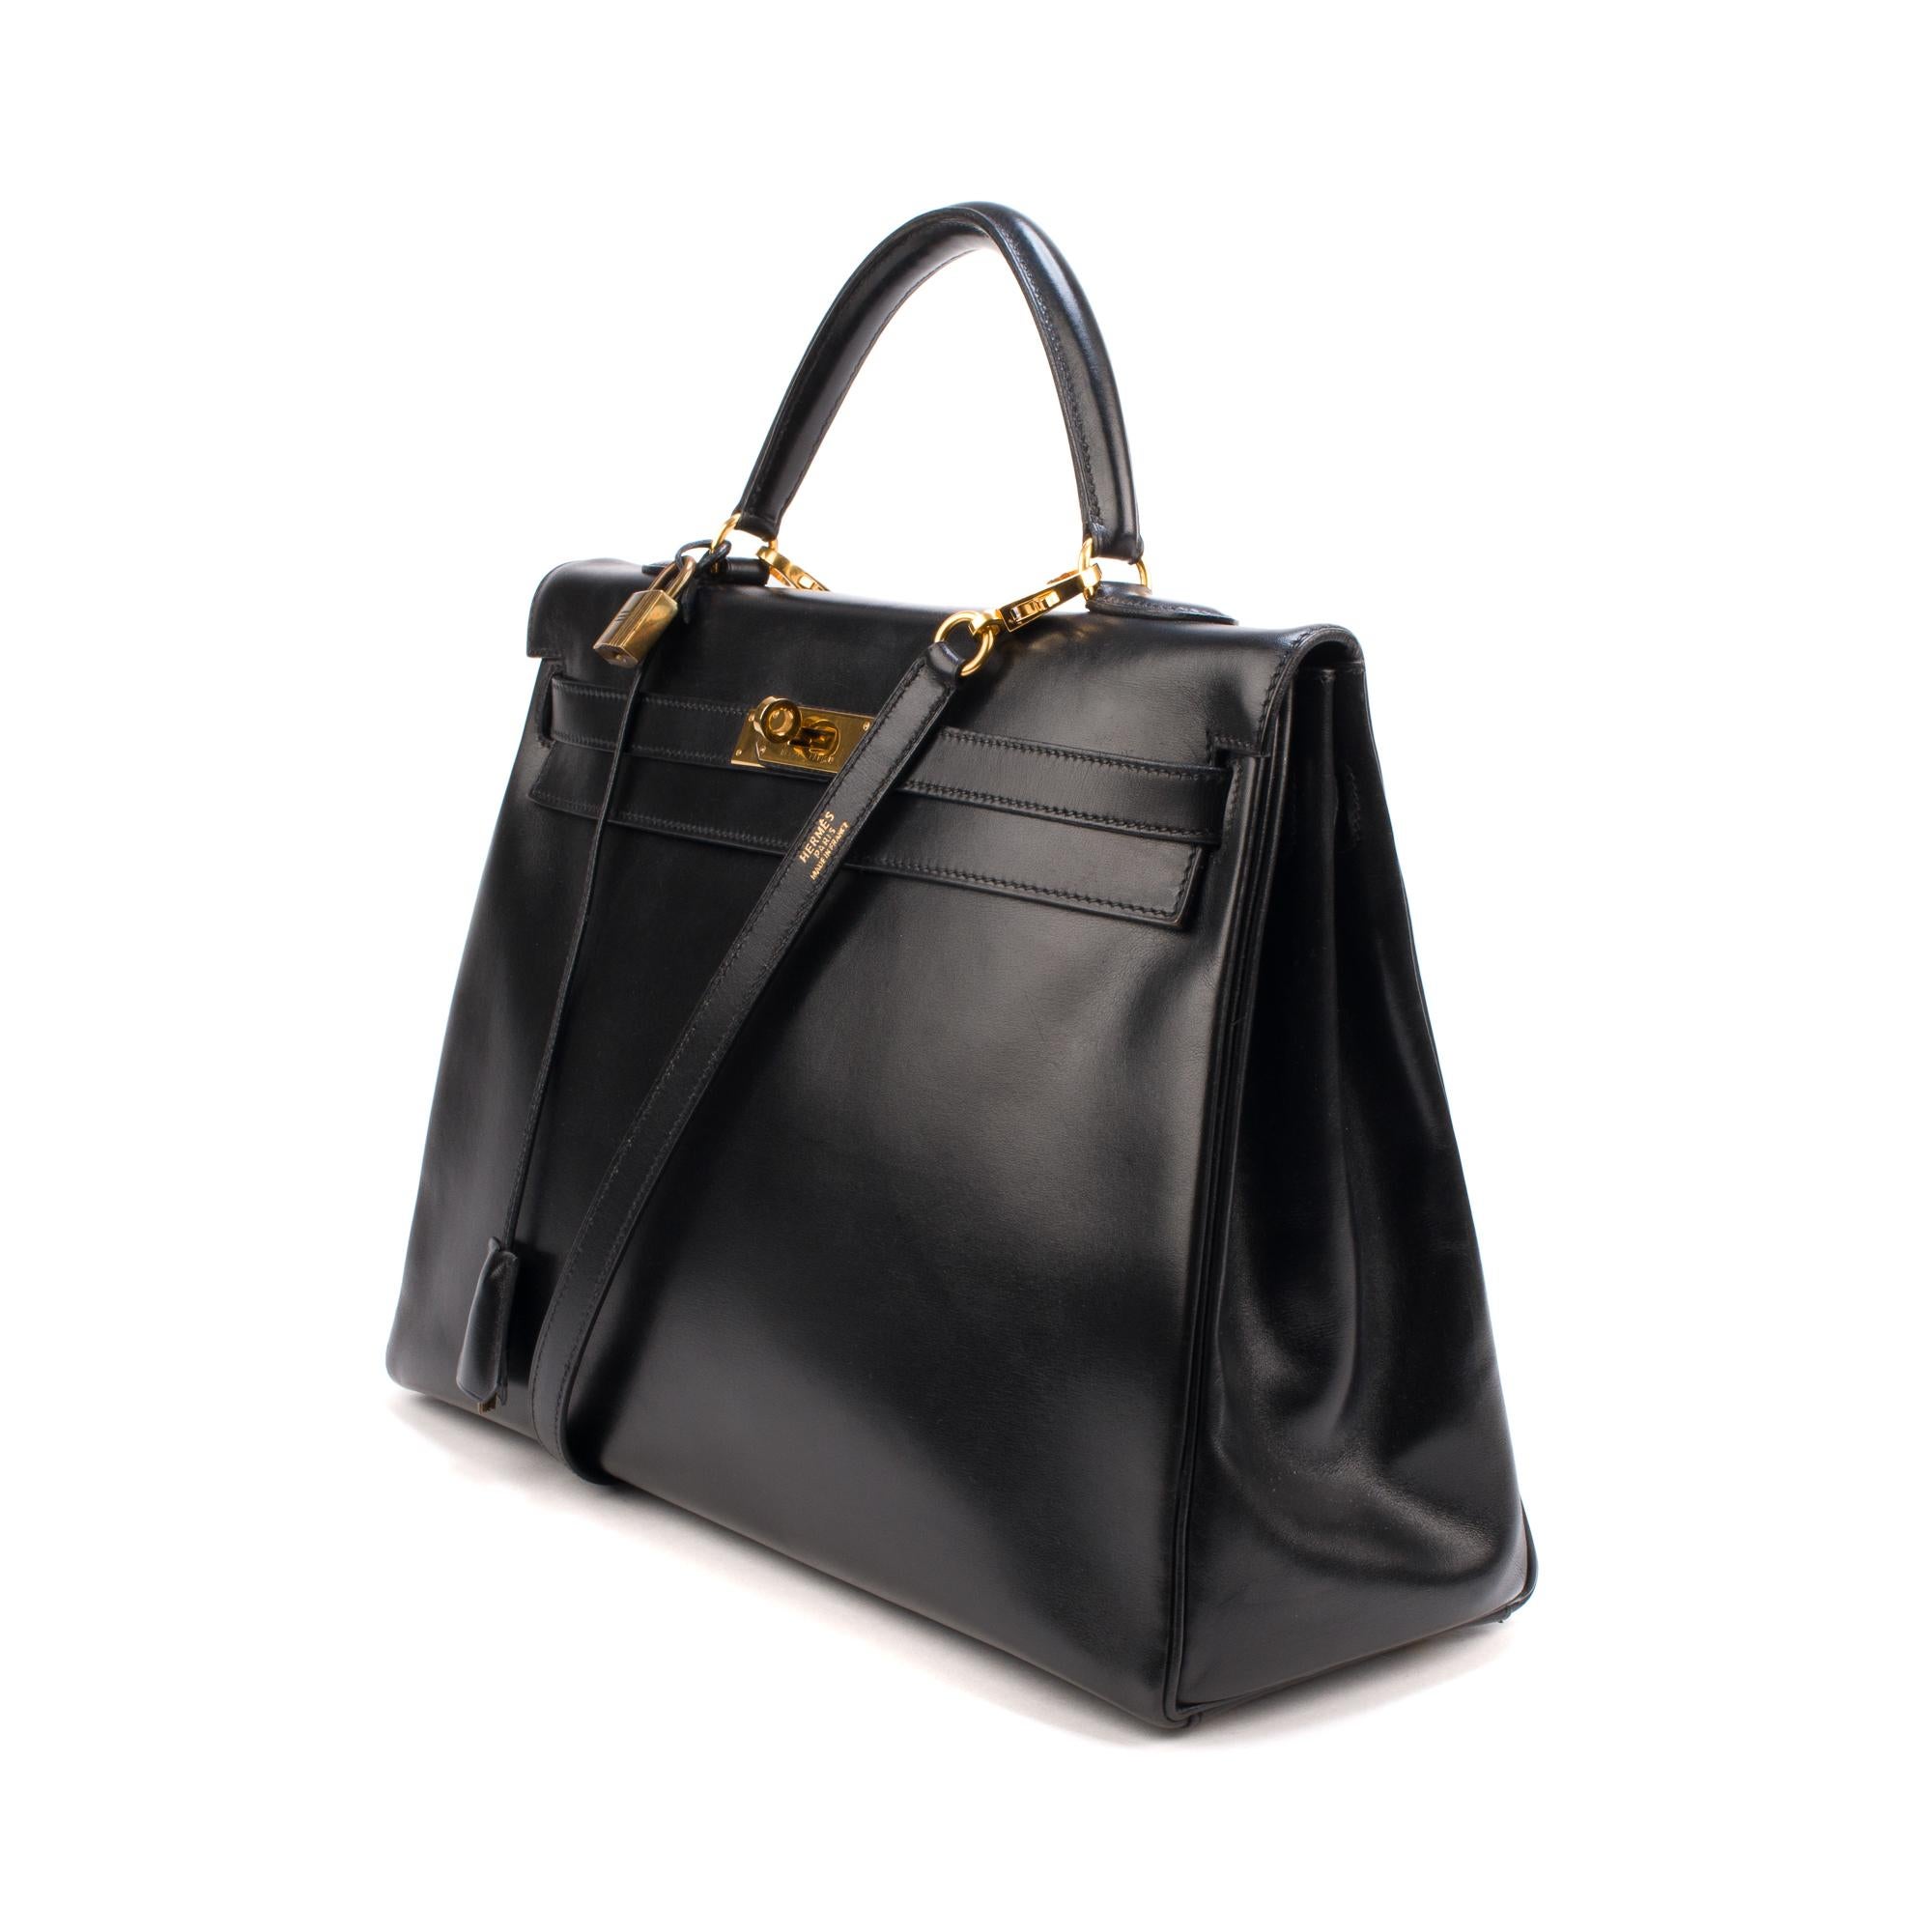 Elegant Hermes Kelly 35 cm handbag in black box leather, gold metal trim, black leather handle, detachable shoulder strap in black leather for hand or shoulder carry.

Flap closure.
Inner lining in black leather, a zipped pocket, a double patch